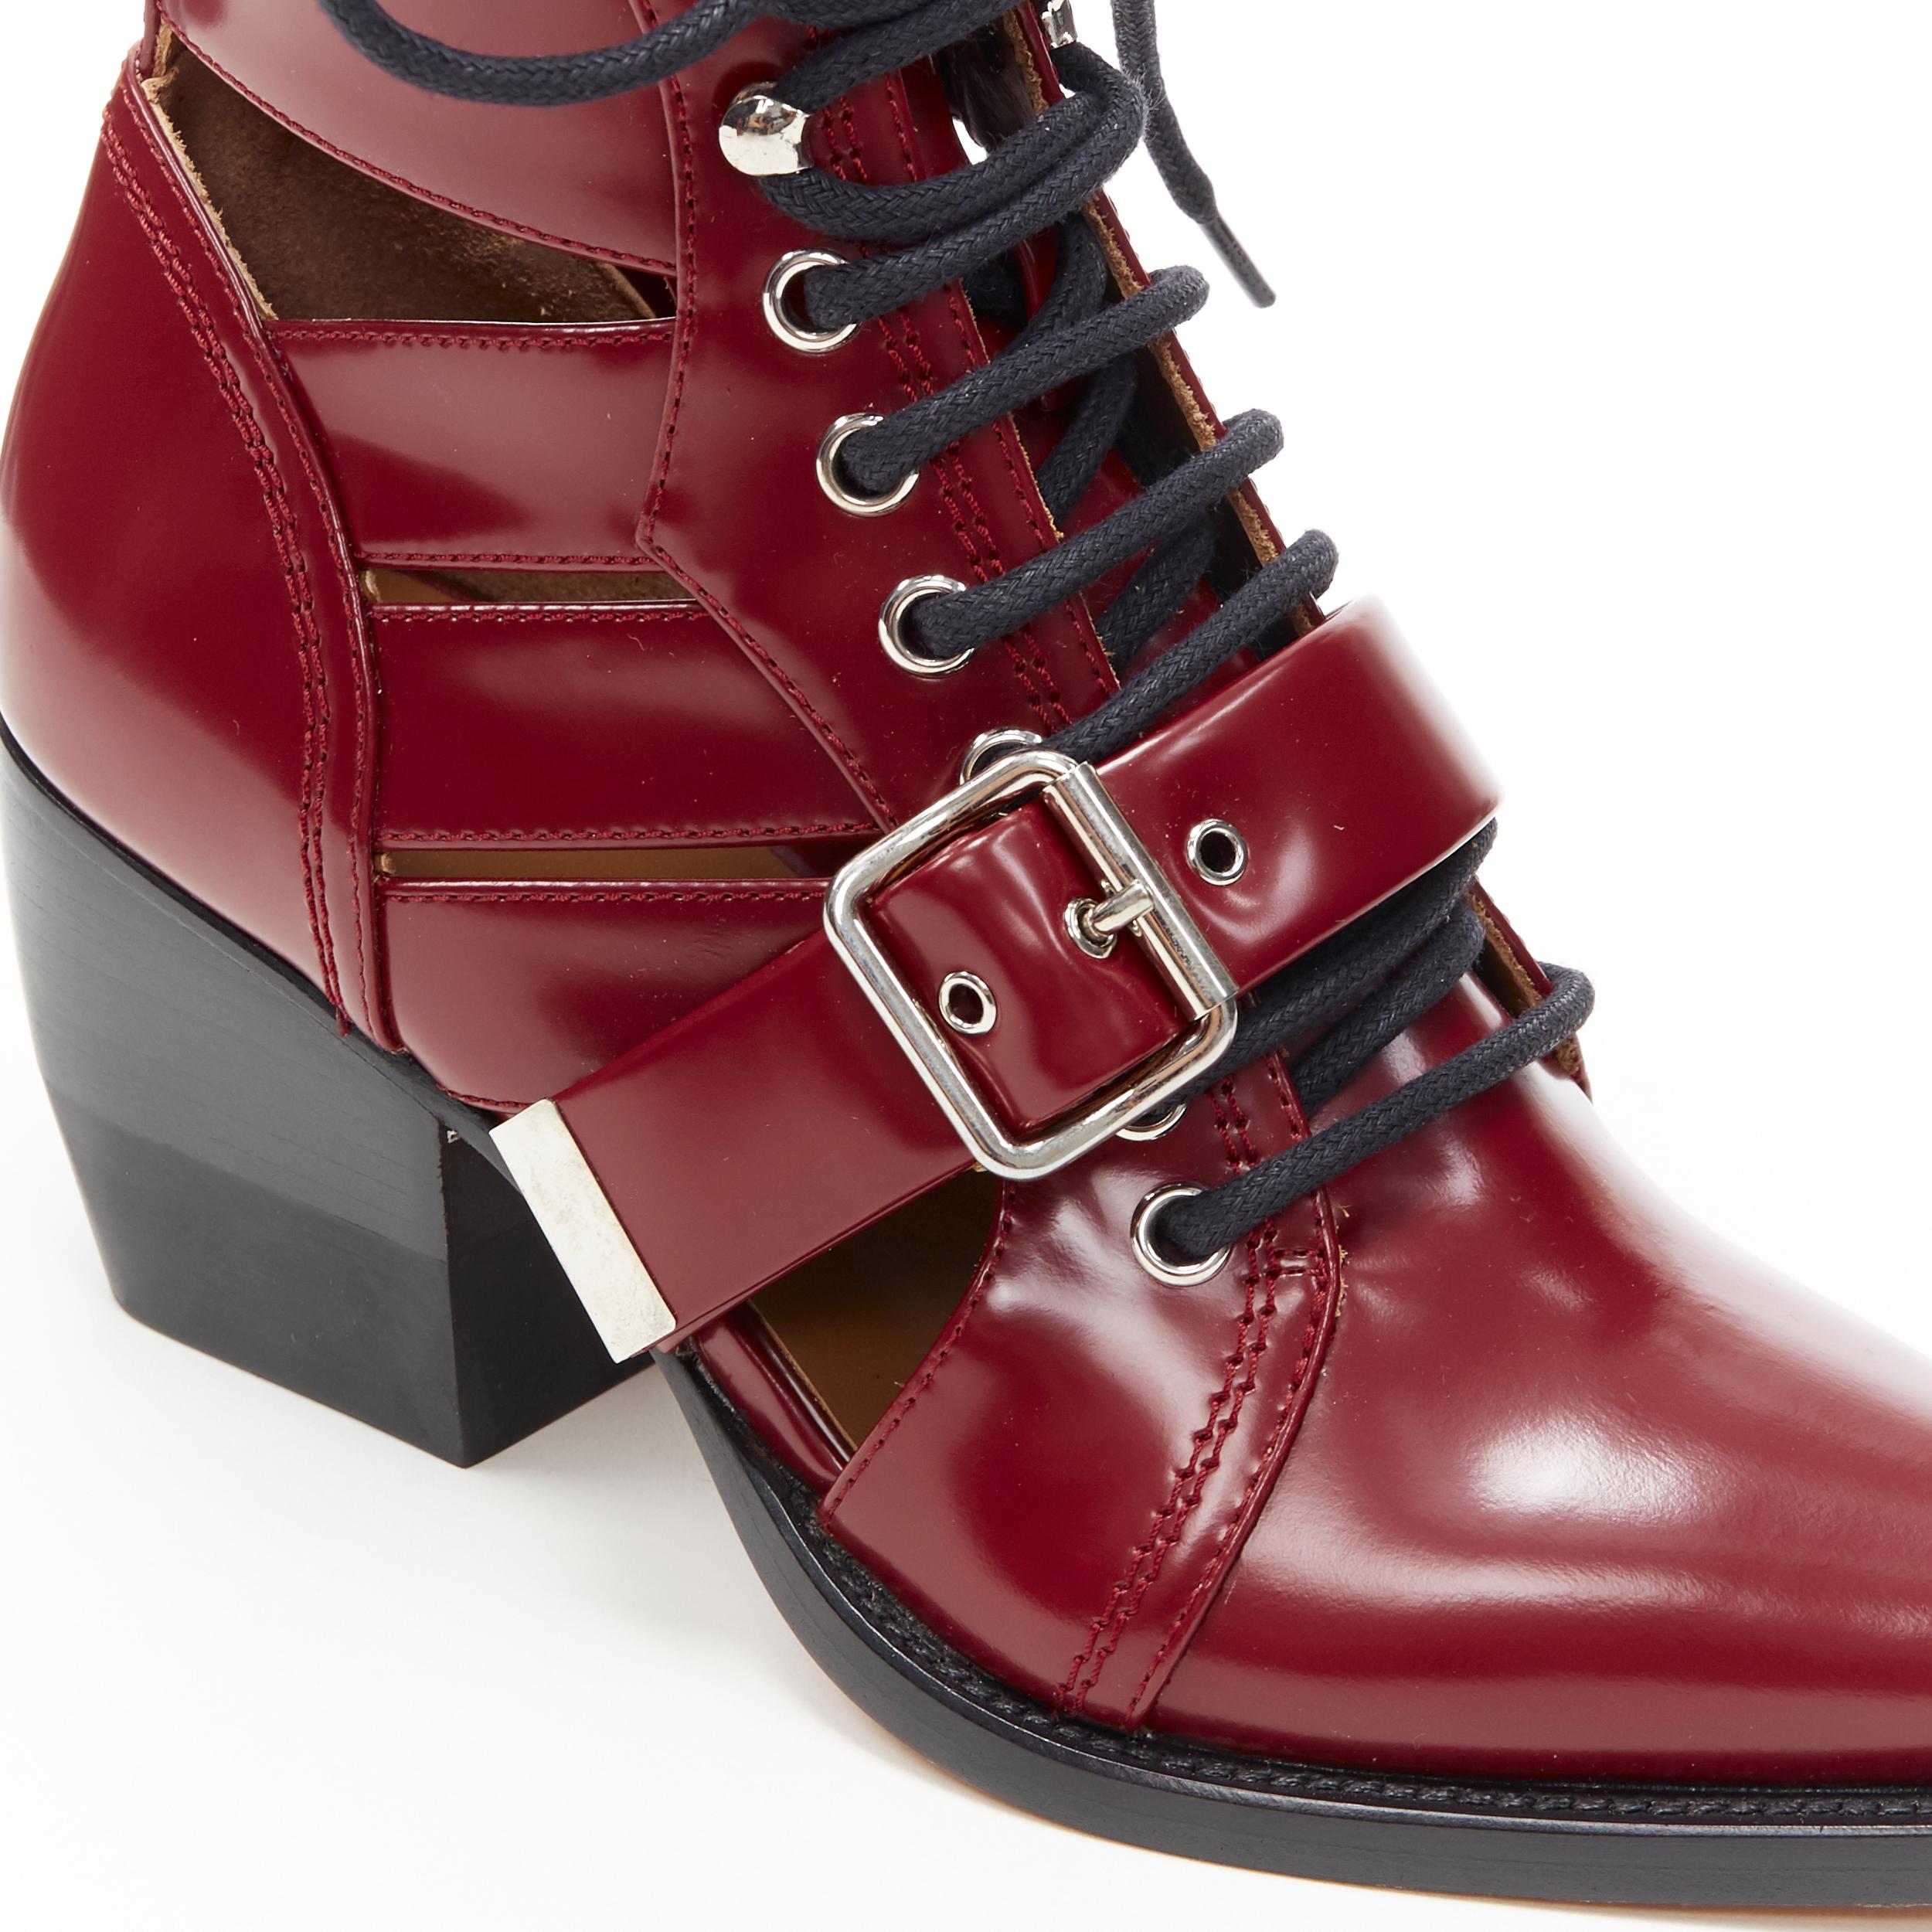 new CHLOE Rylee burgundy red leather cut out buckled pointy ankle boot EU38.5 2